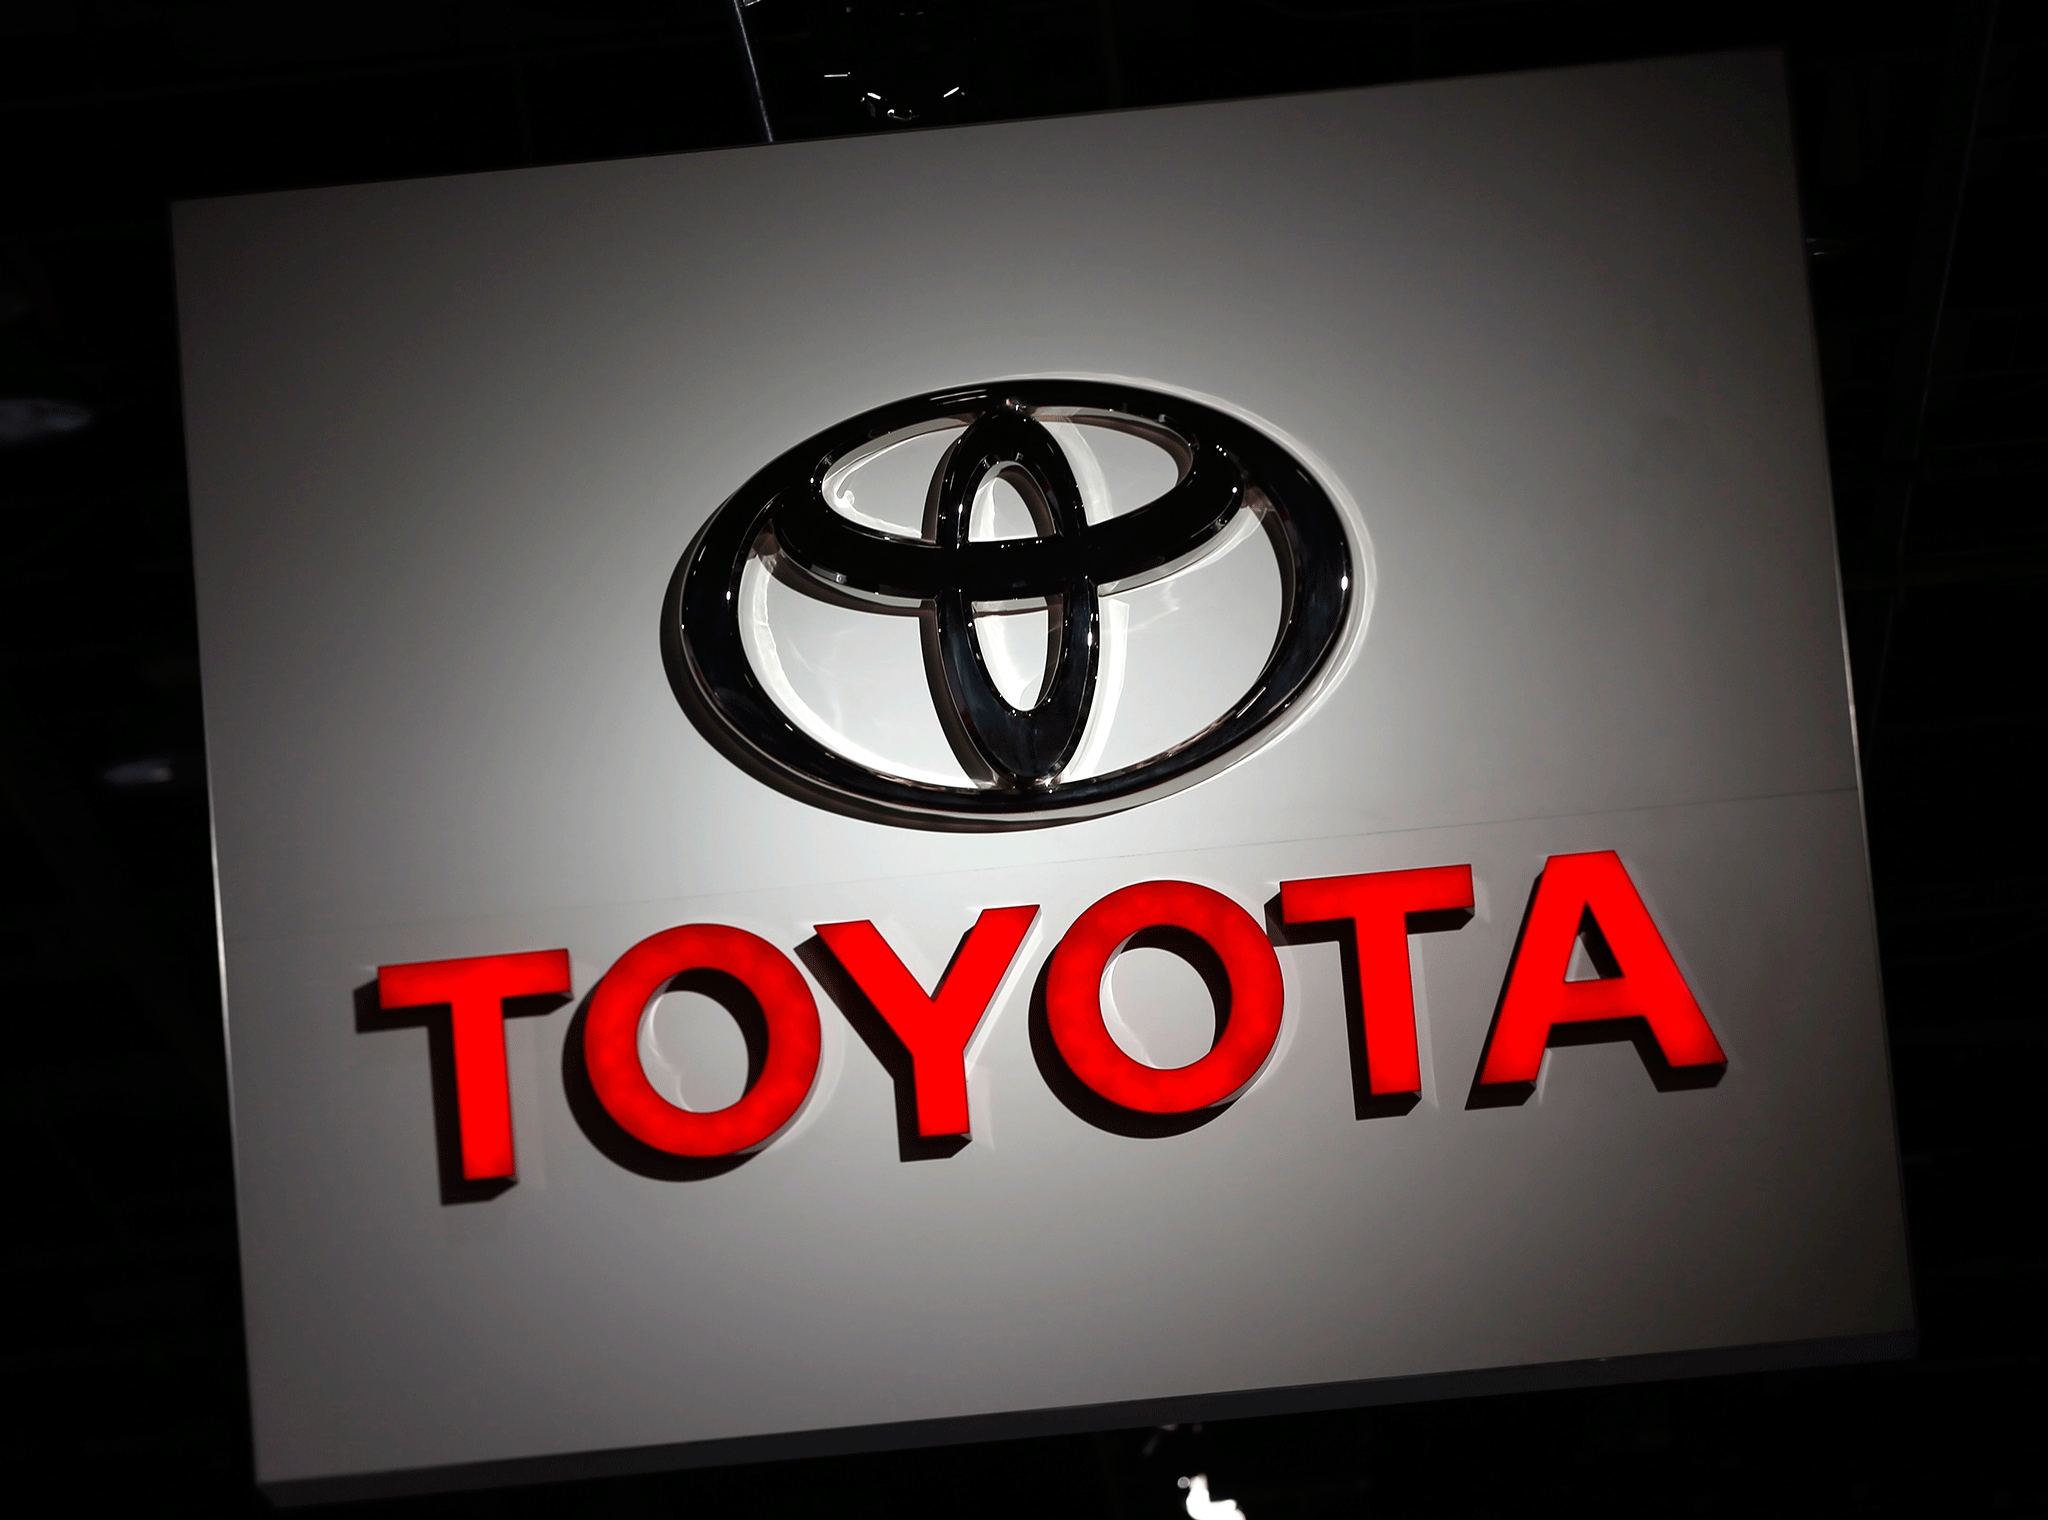 Toyota recalls 3 million cars after exploding airbags linked to deaths